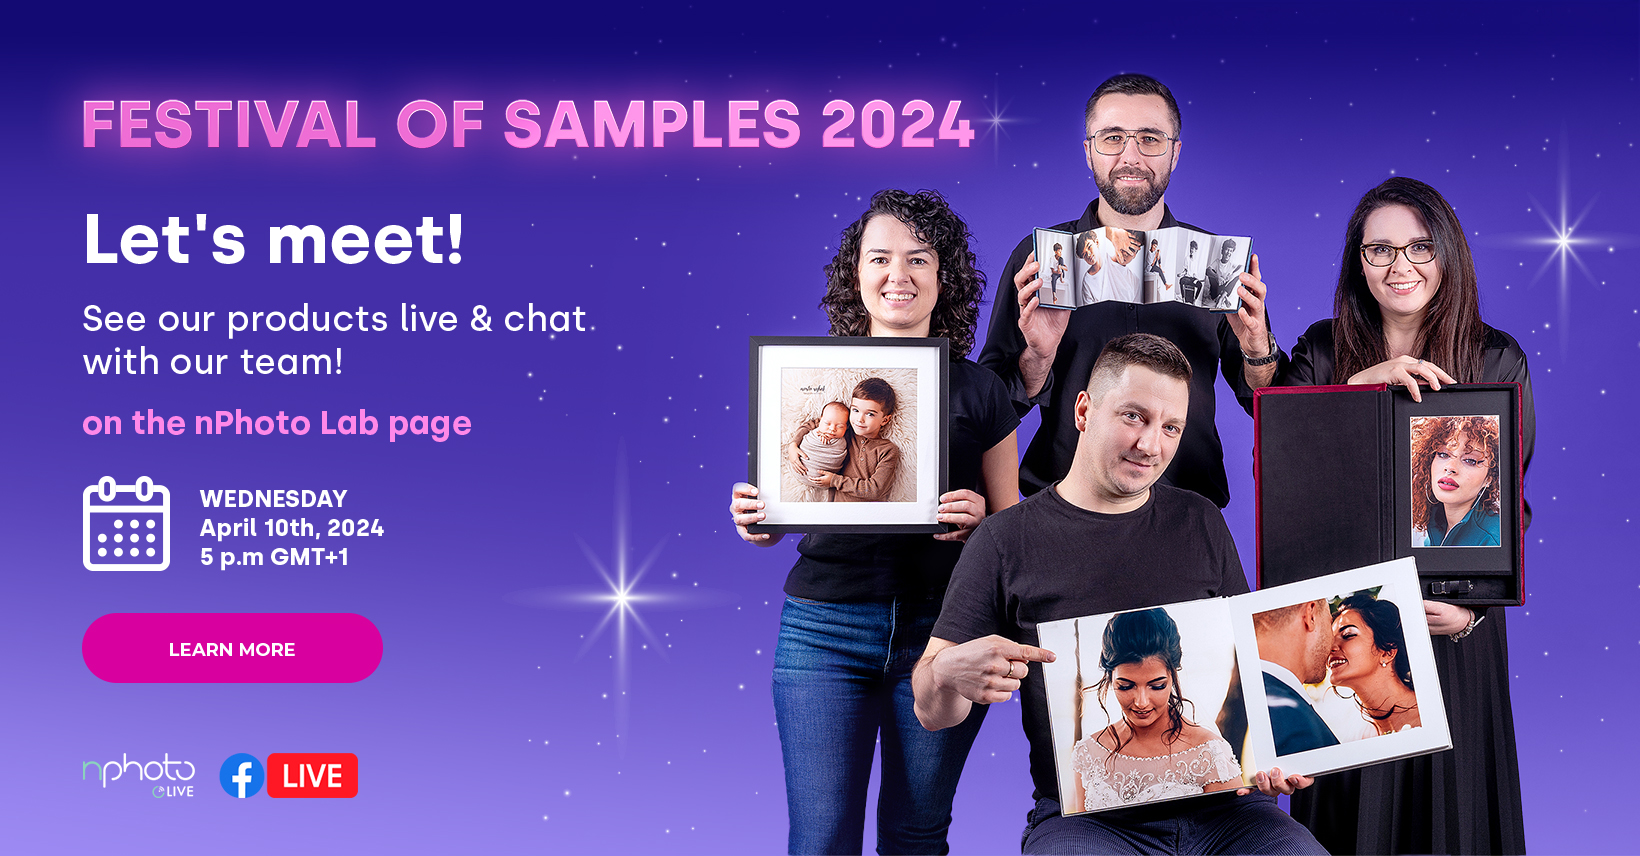 Festival of Samples 2024 Live Chat with nPhoto